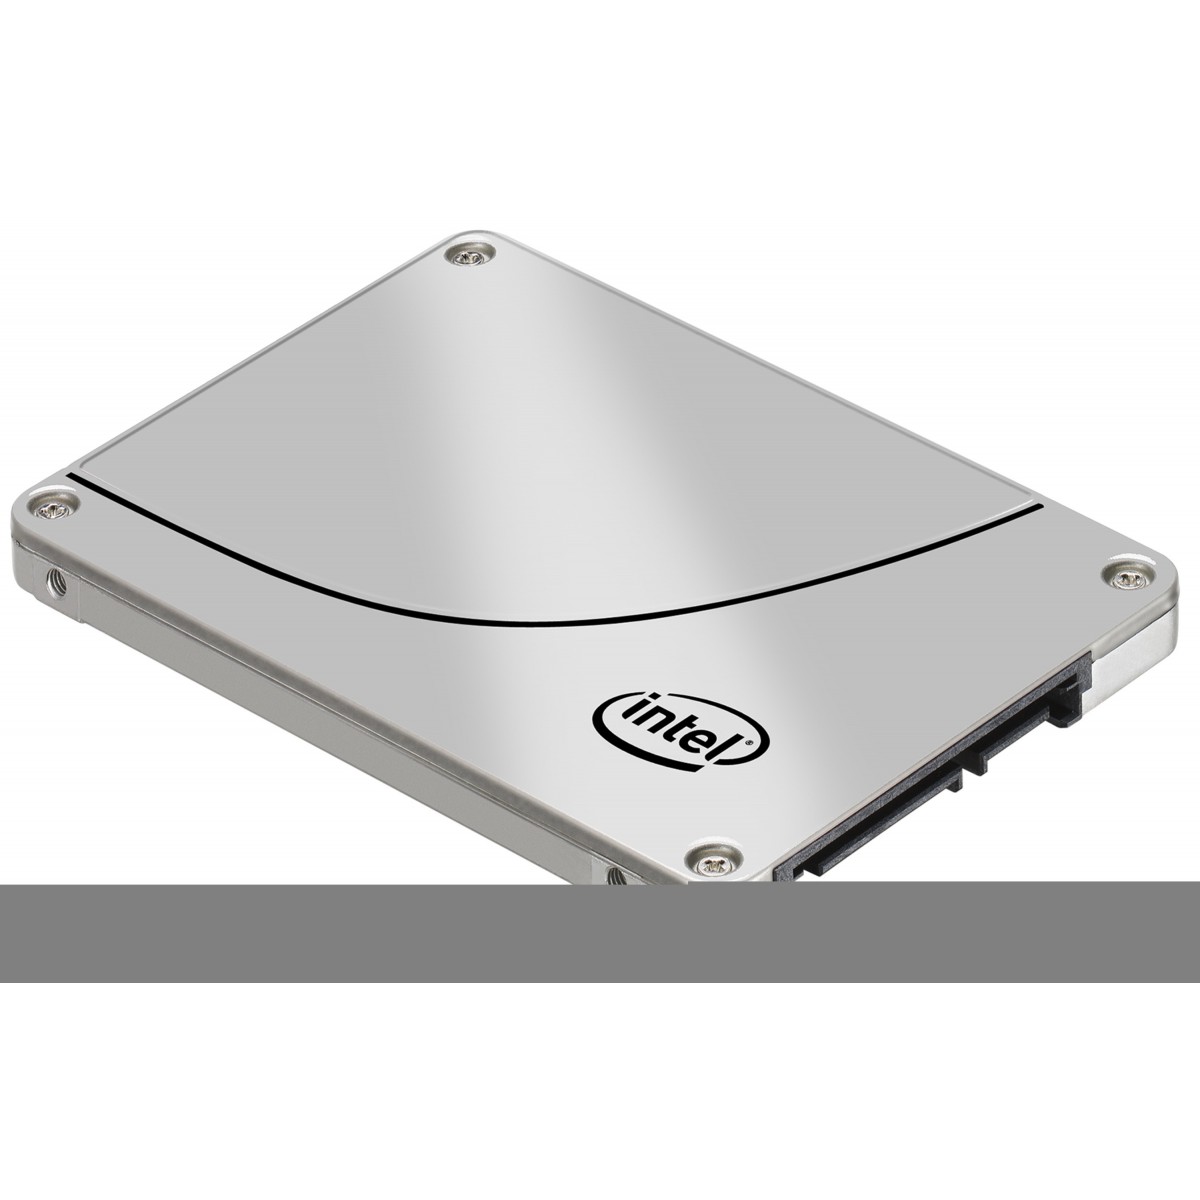 Intel Solid-State Drive DC S3500 Series 2.5 SATA 800 GB - Solid State Disk - Internal